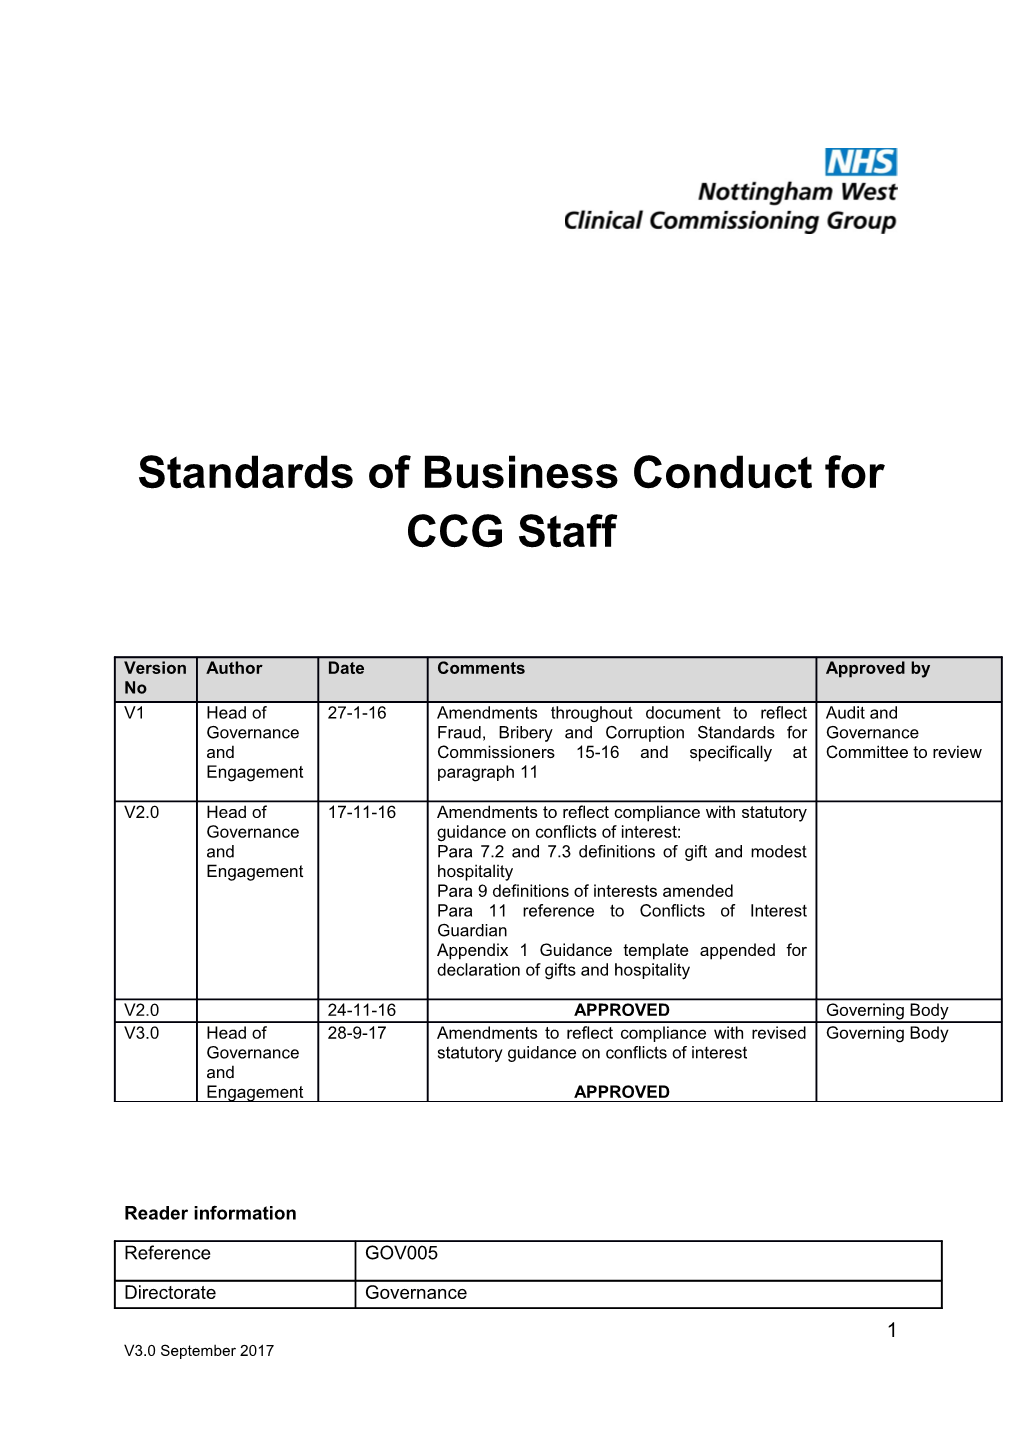 Standards of Business Conduct for CCG Staff